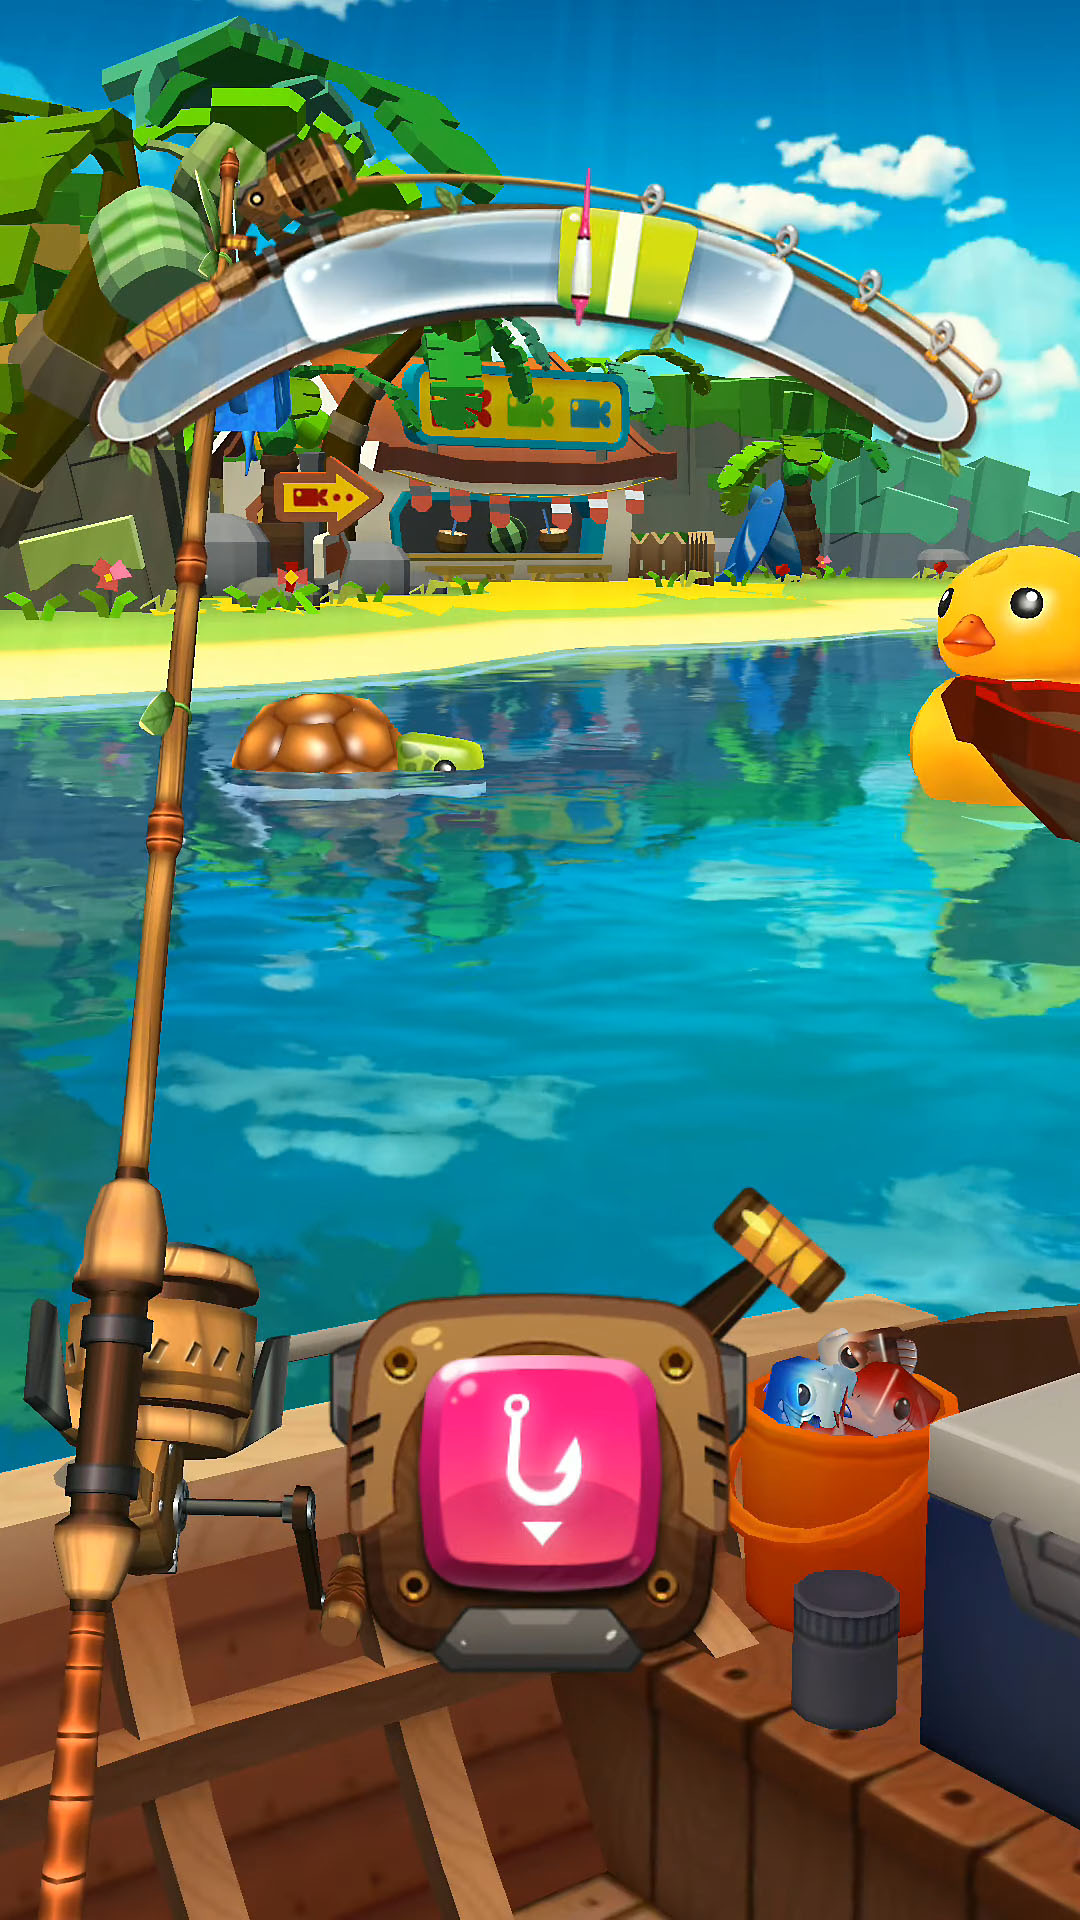 Fishing Cube for Android